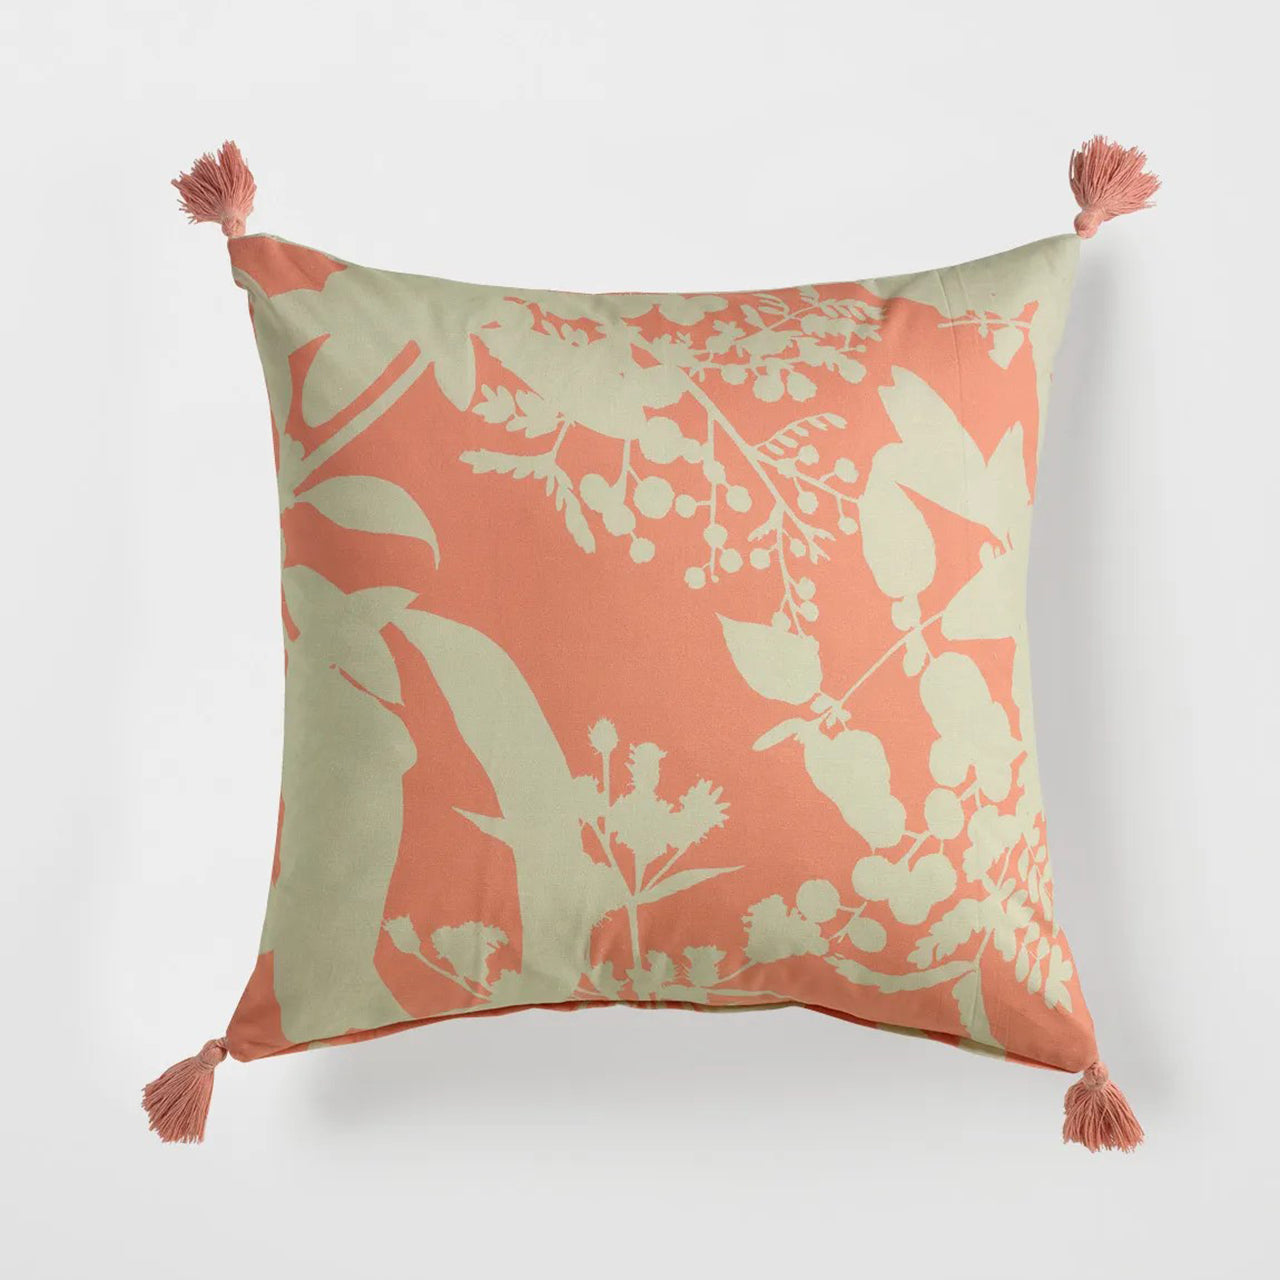 Lola Cushion Cover on a white background